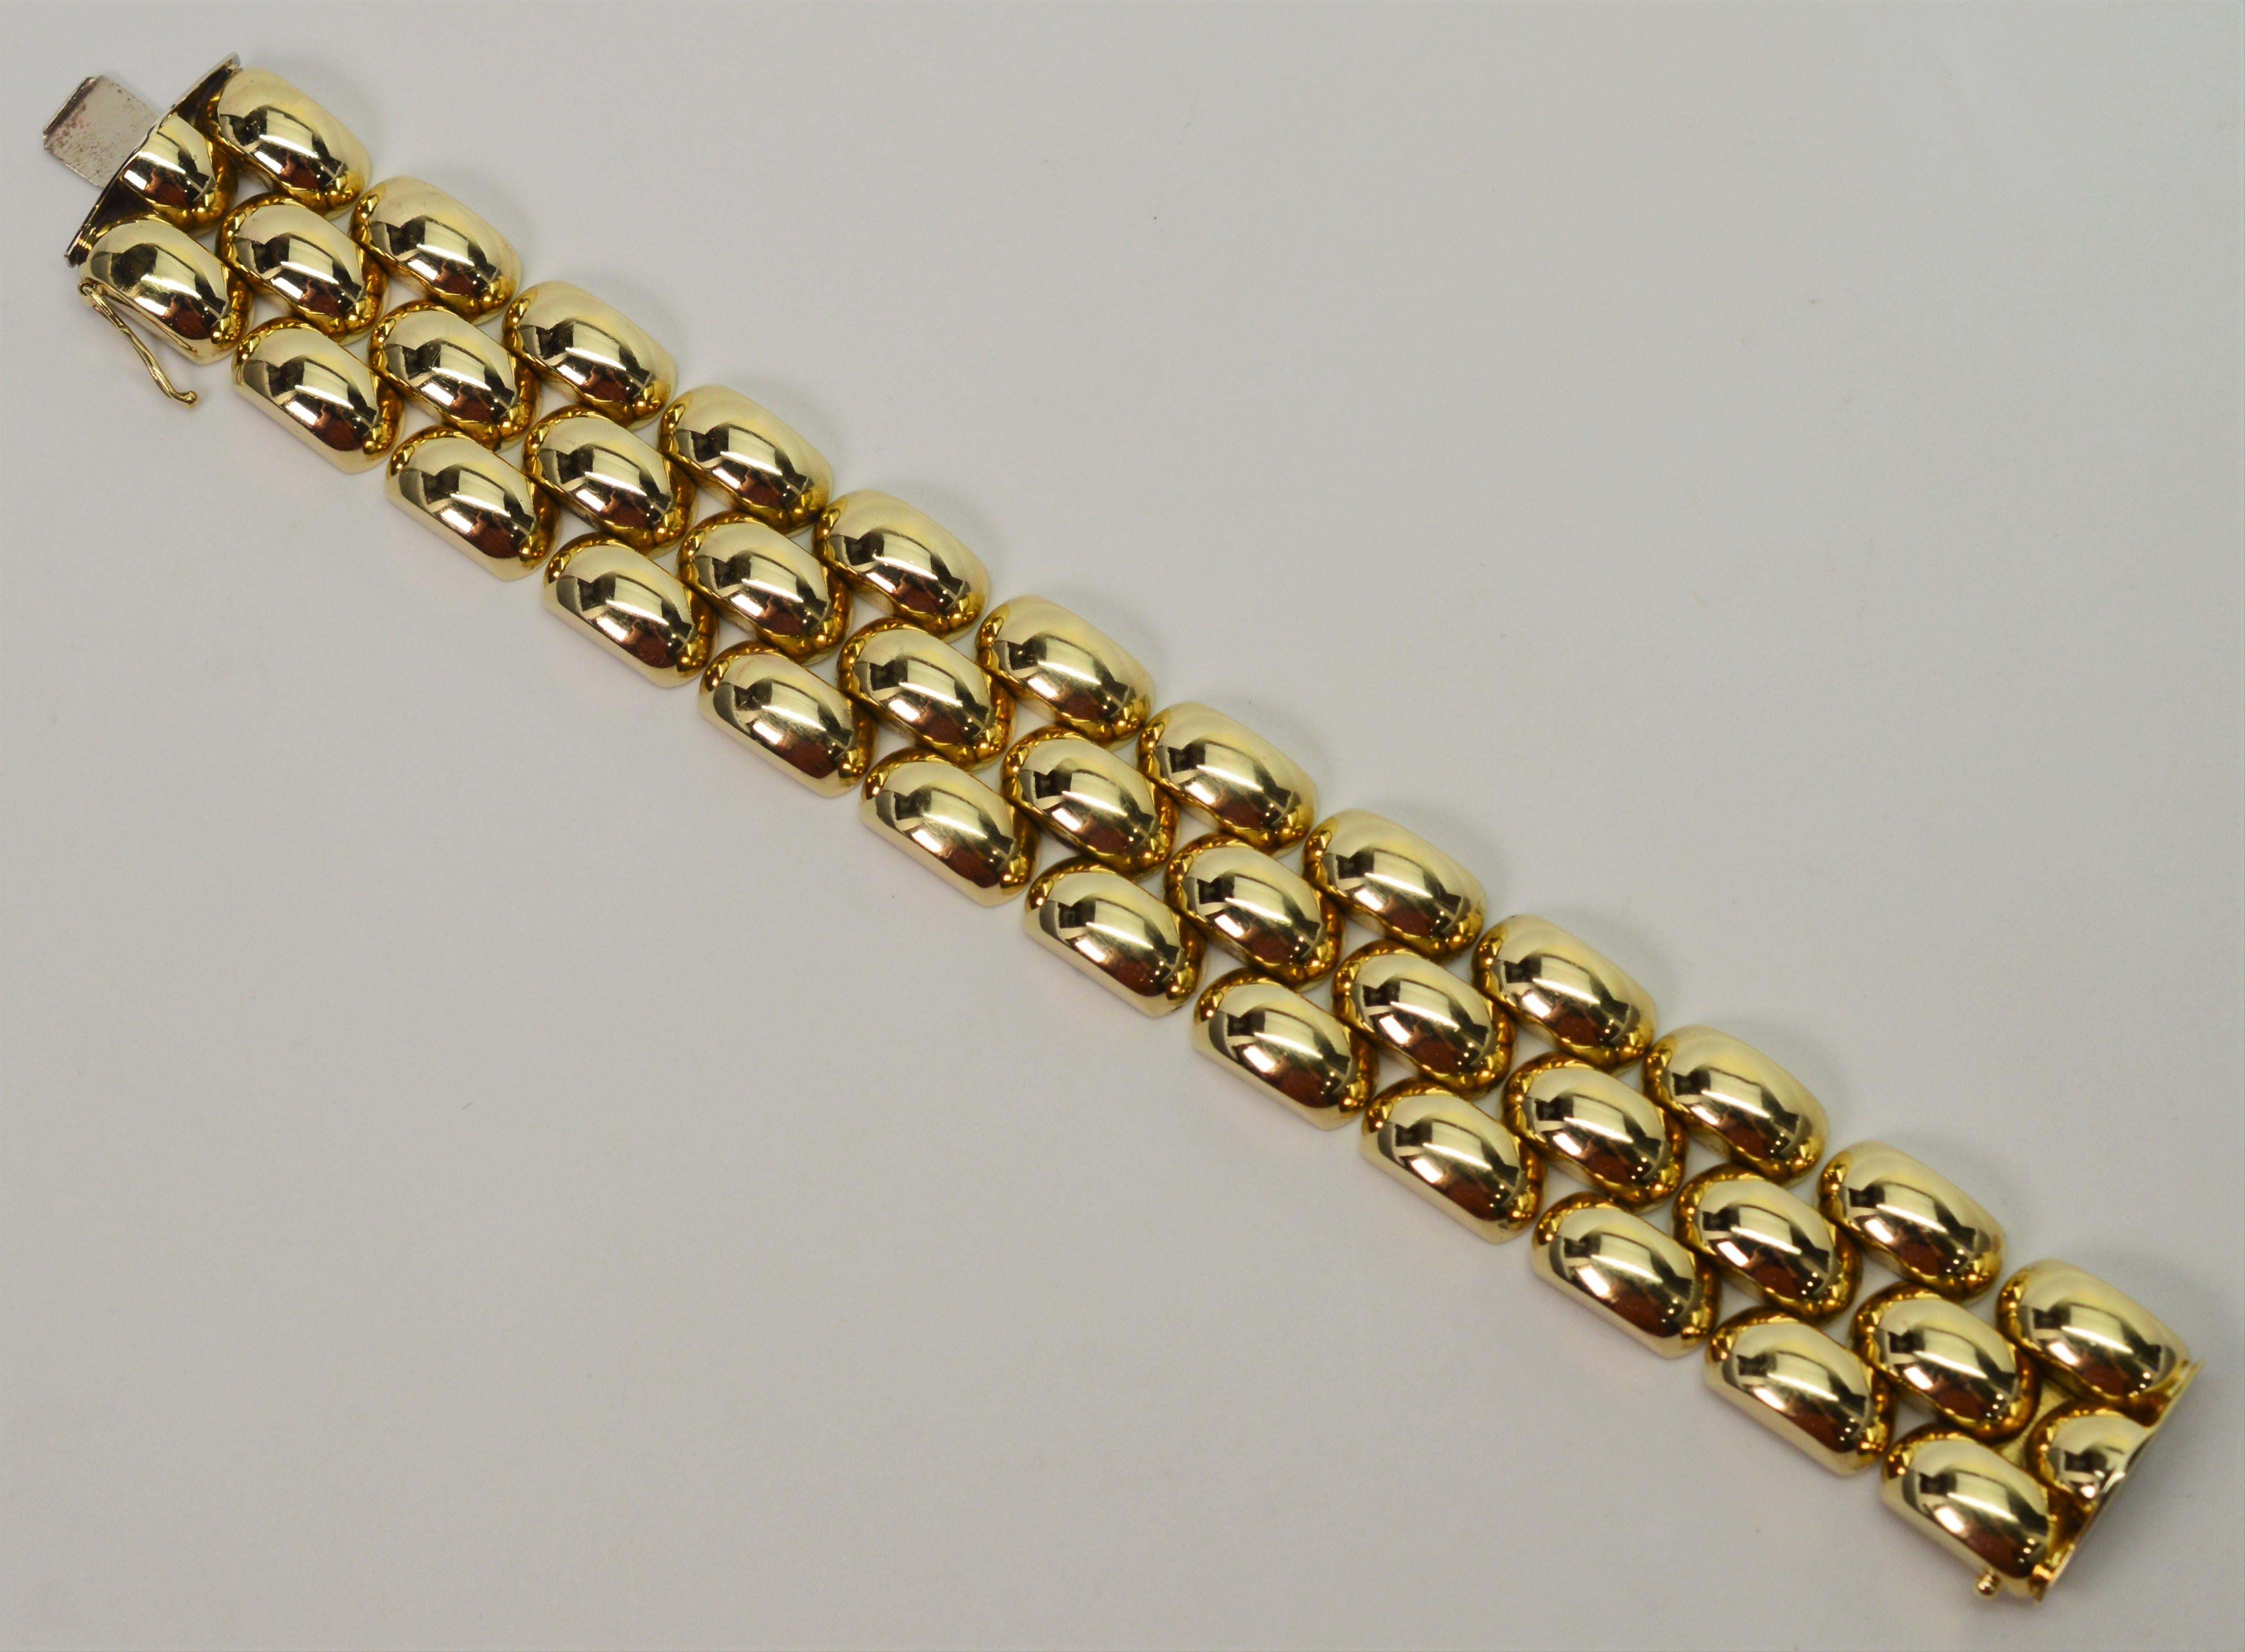 Make a stylish gold statement with this exquisite retro bracelet. In the style of the 1950 to early 1960's, this substantial fourteen carat 14K Italian gold bracelet is made of distinctive bubble links hinged in an interesting alternating pattern